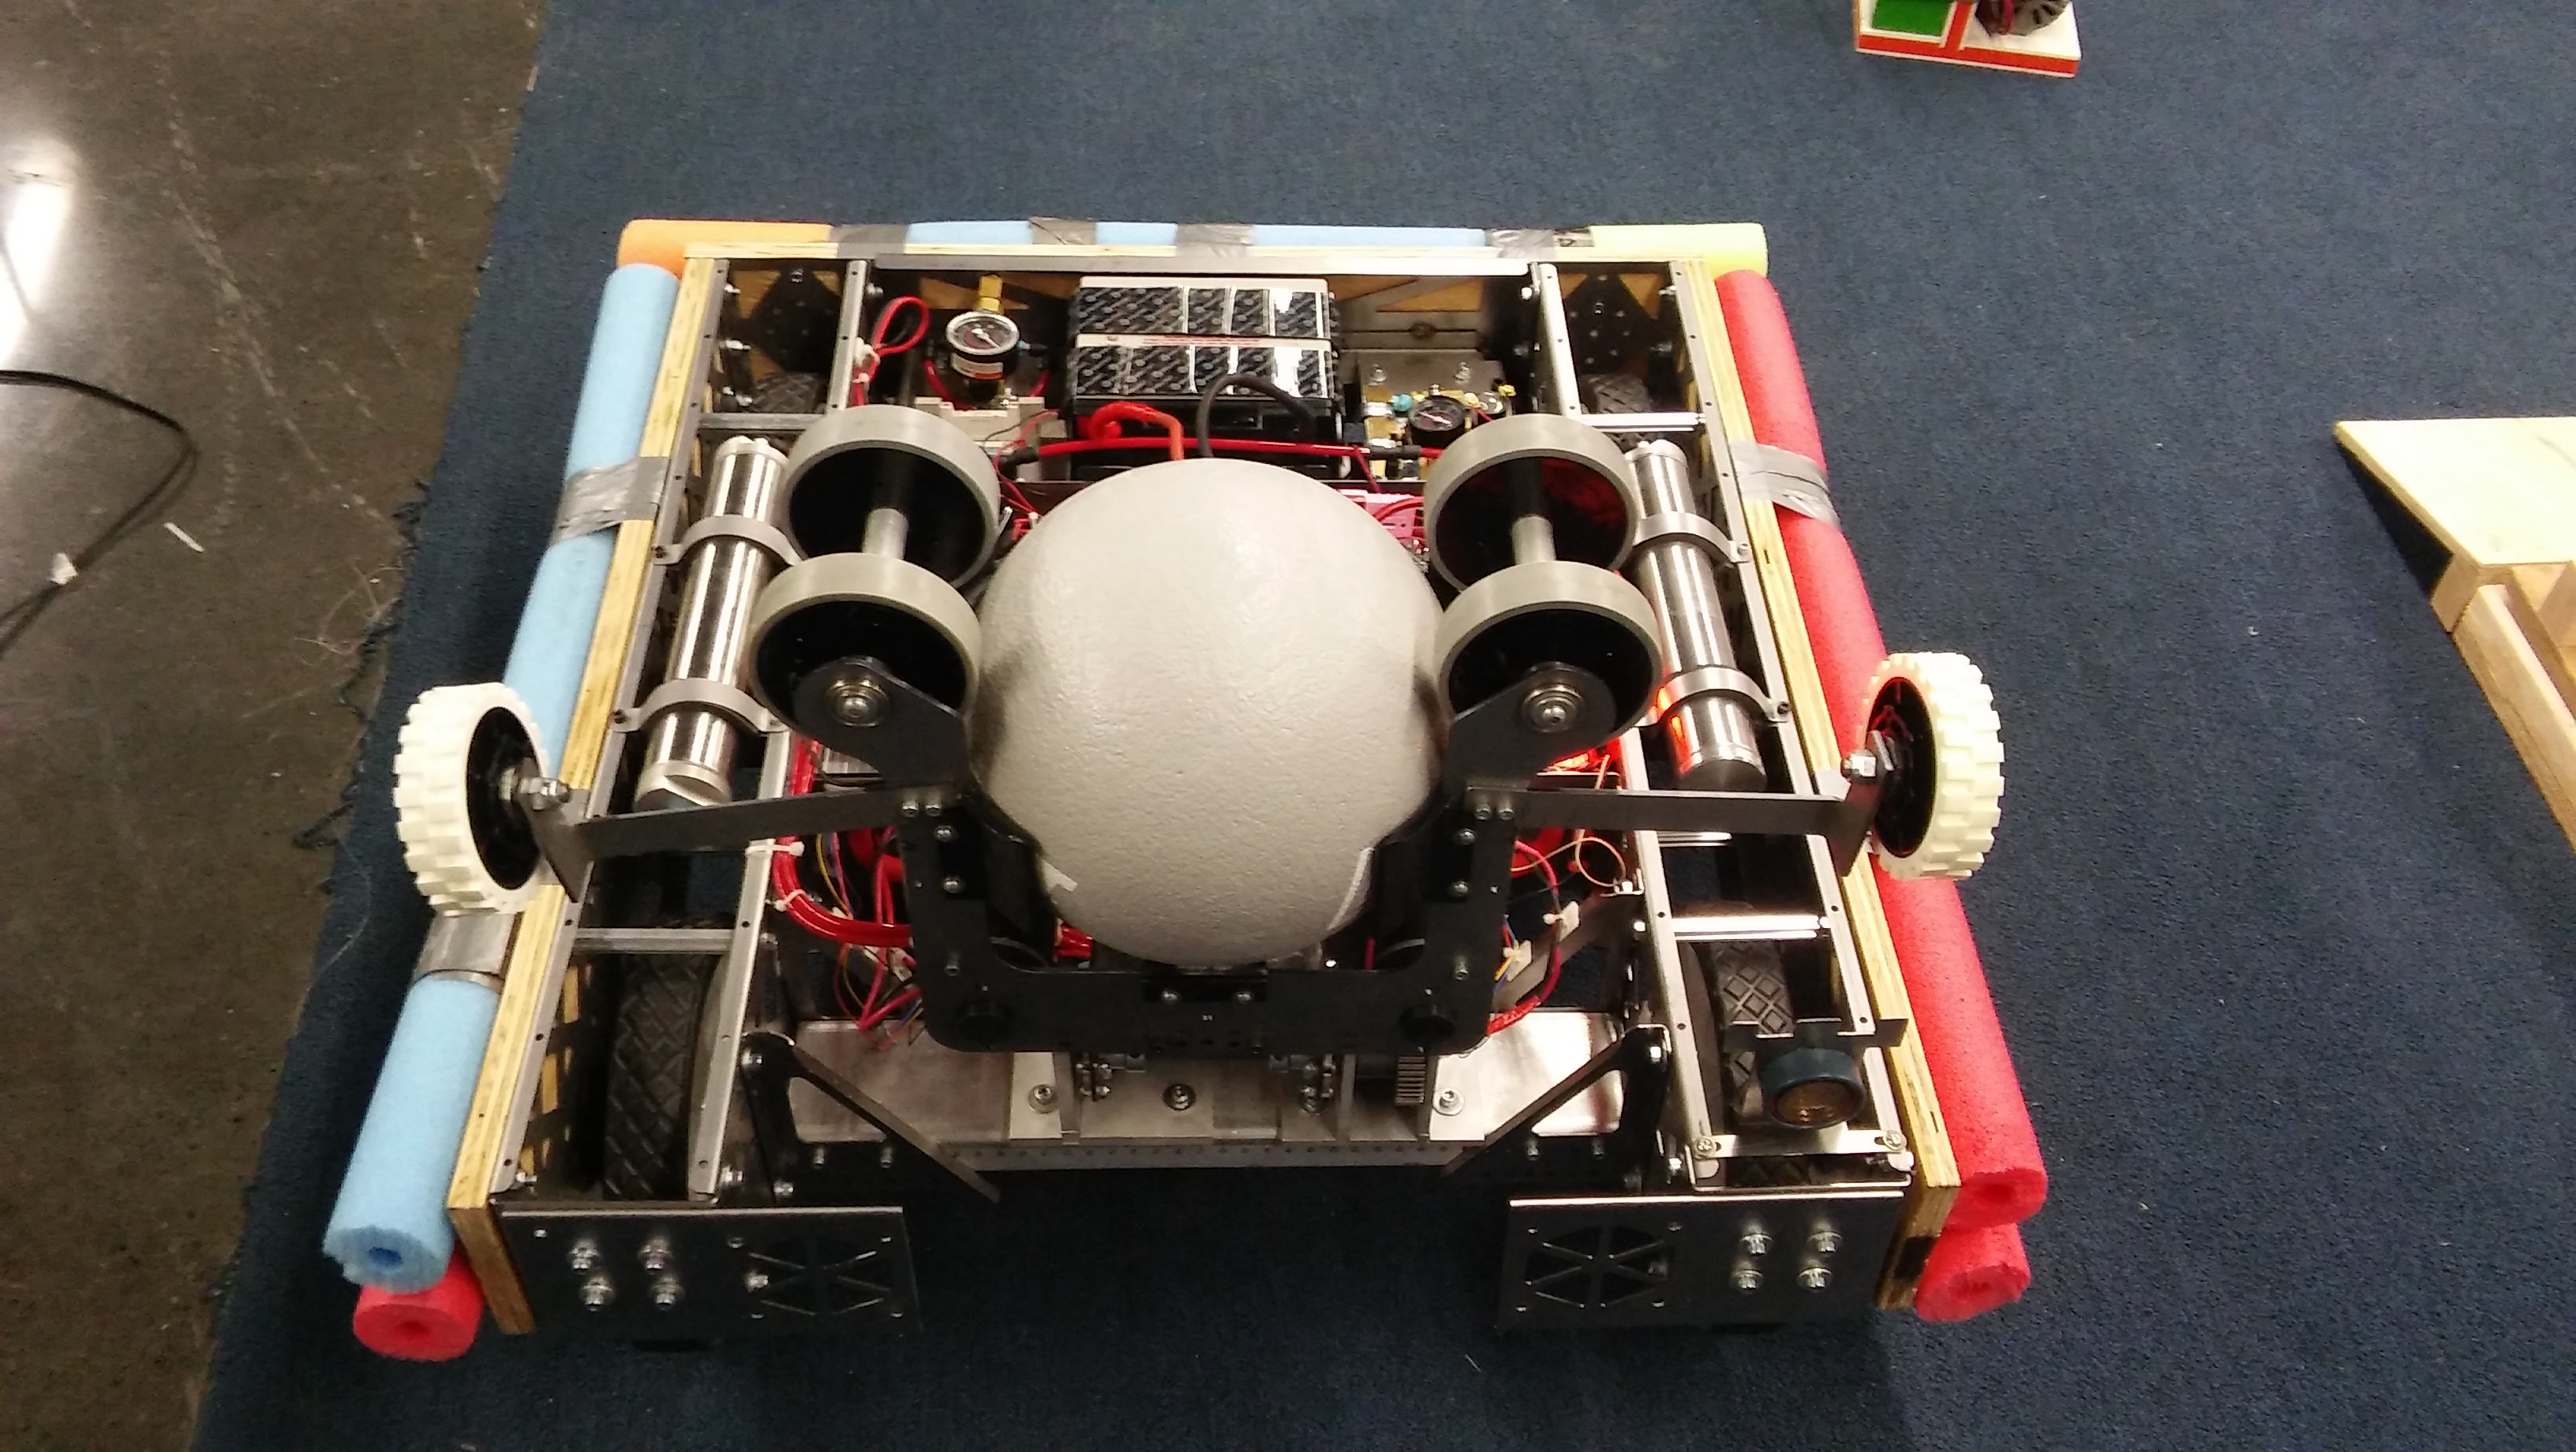 Our robot 2015-2016